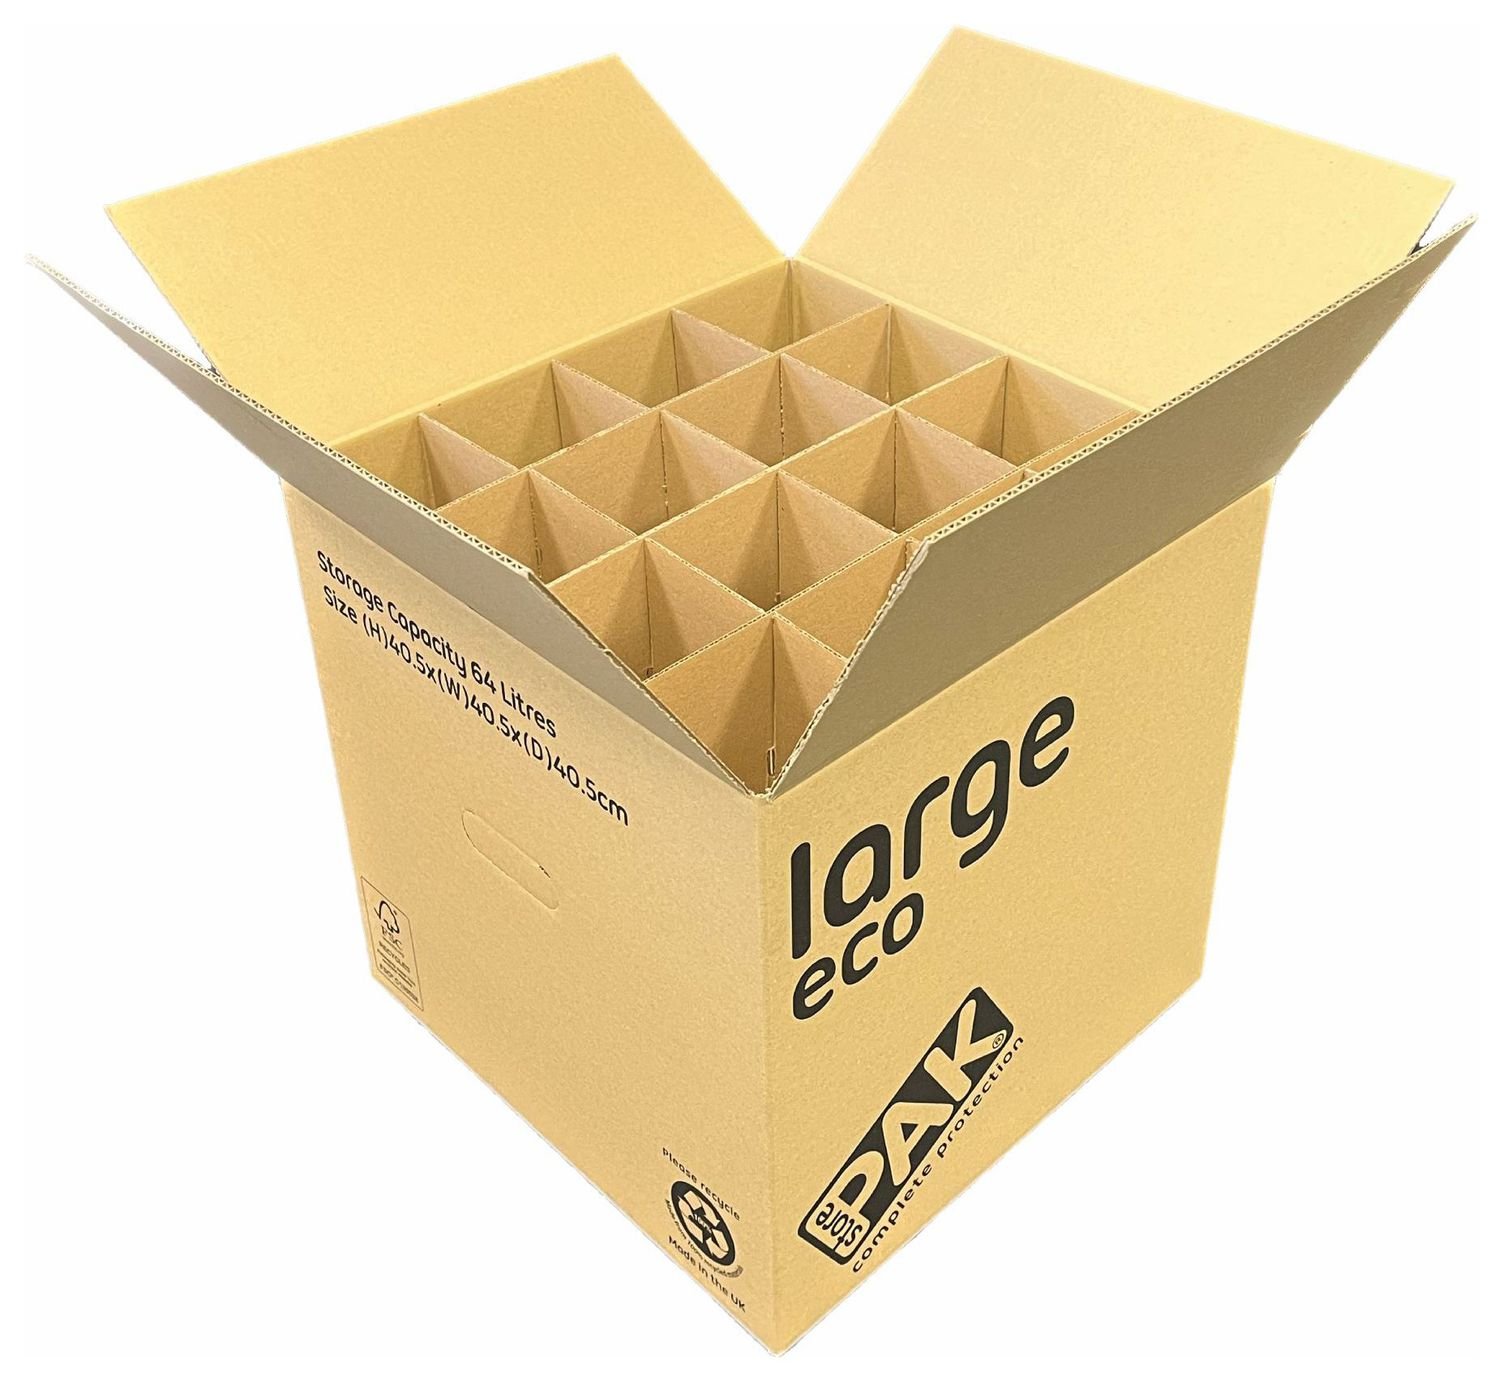 StorePAK Eco Glass Moving House Boxes With 32 Item Divisions